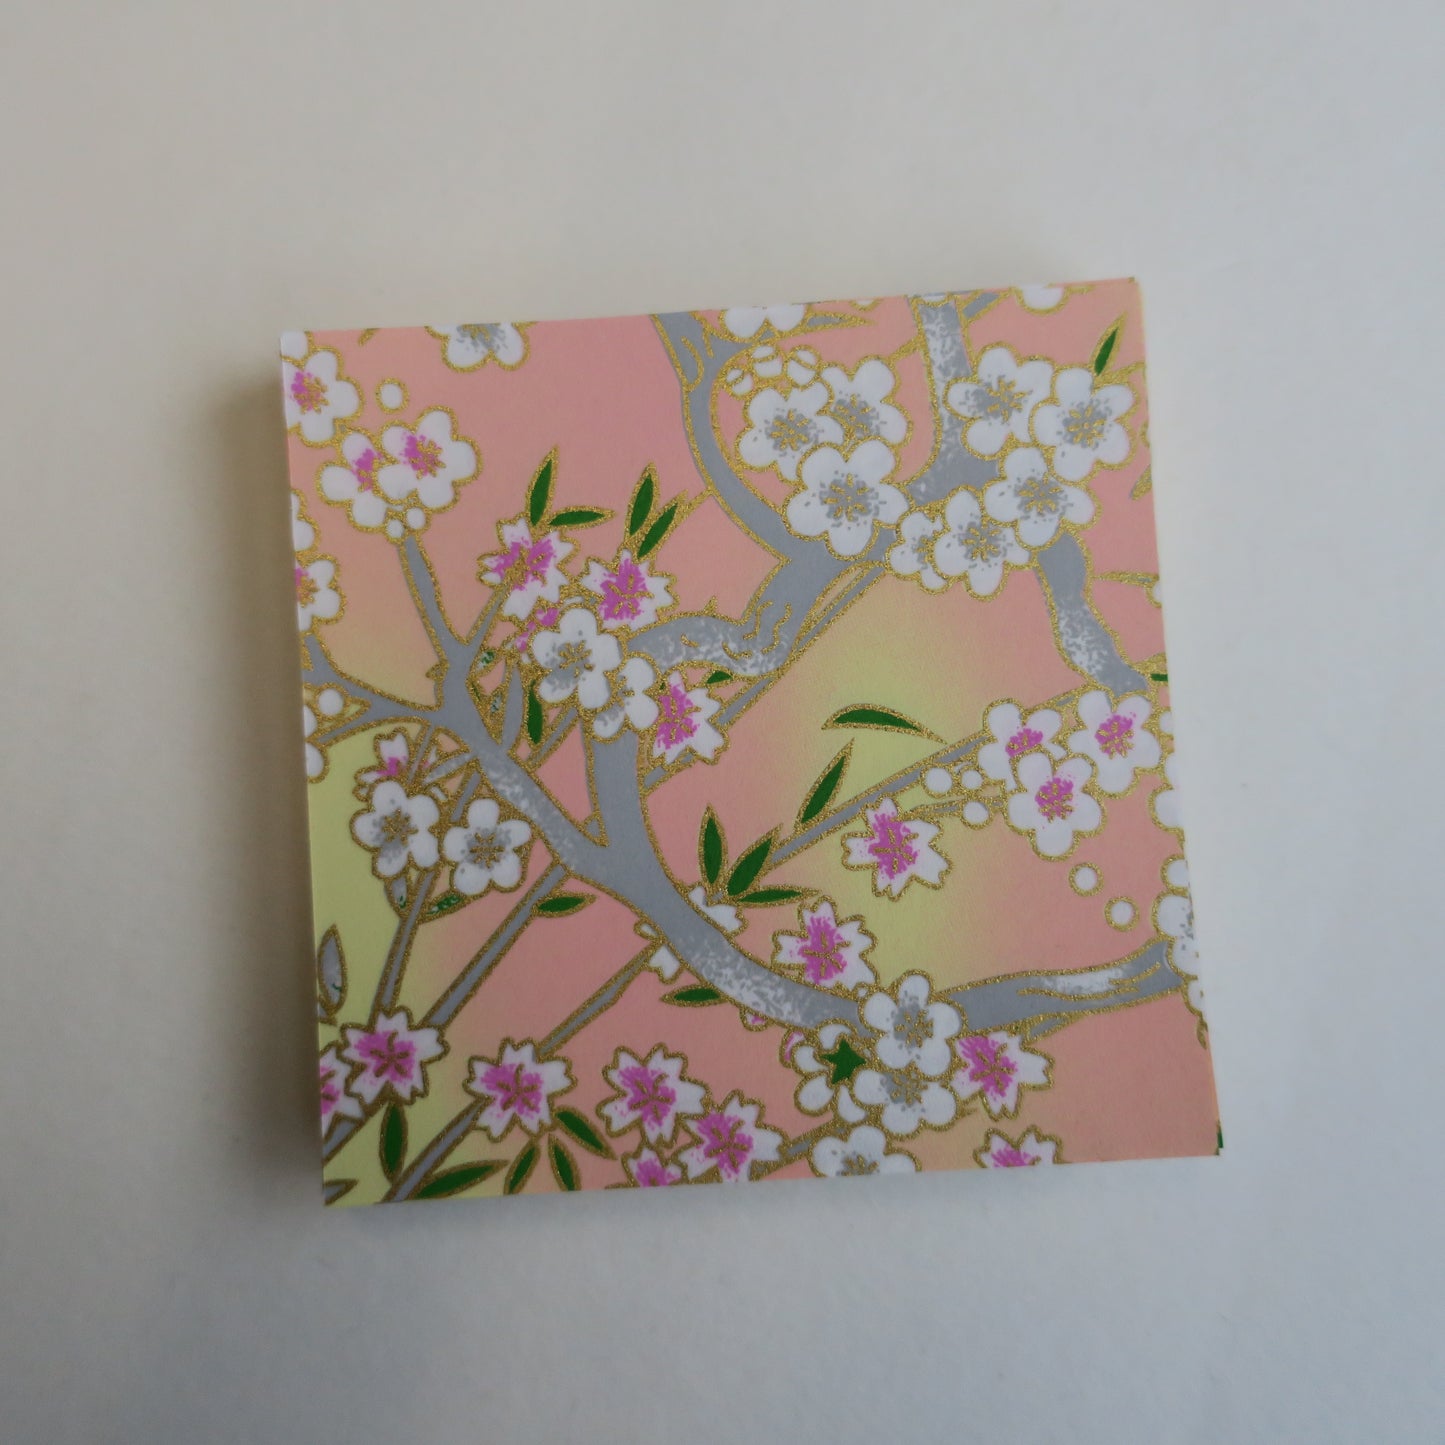 Pack of 100 Sheets 7x7cm Yuzen Washi Origami Paper HZ-420 - Spring Cherry Blossom & Bamboo